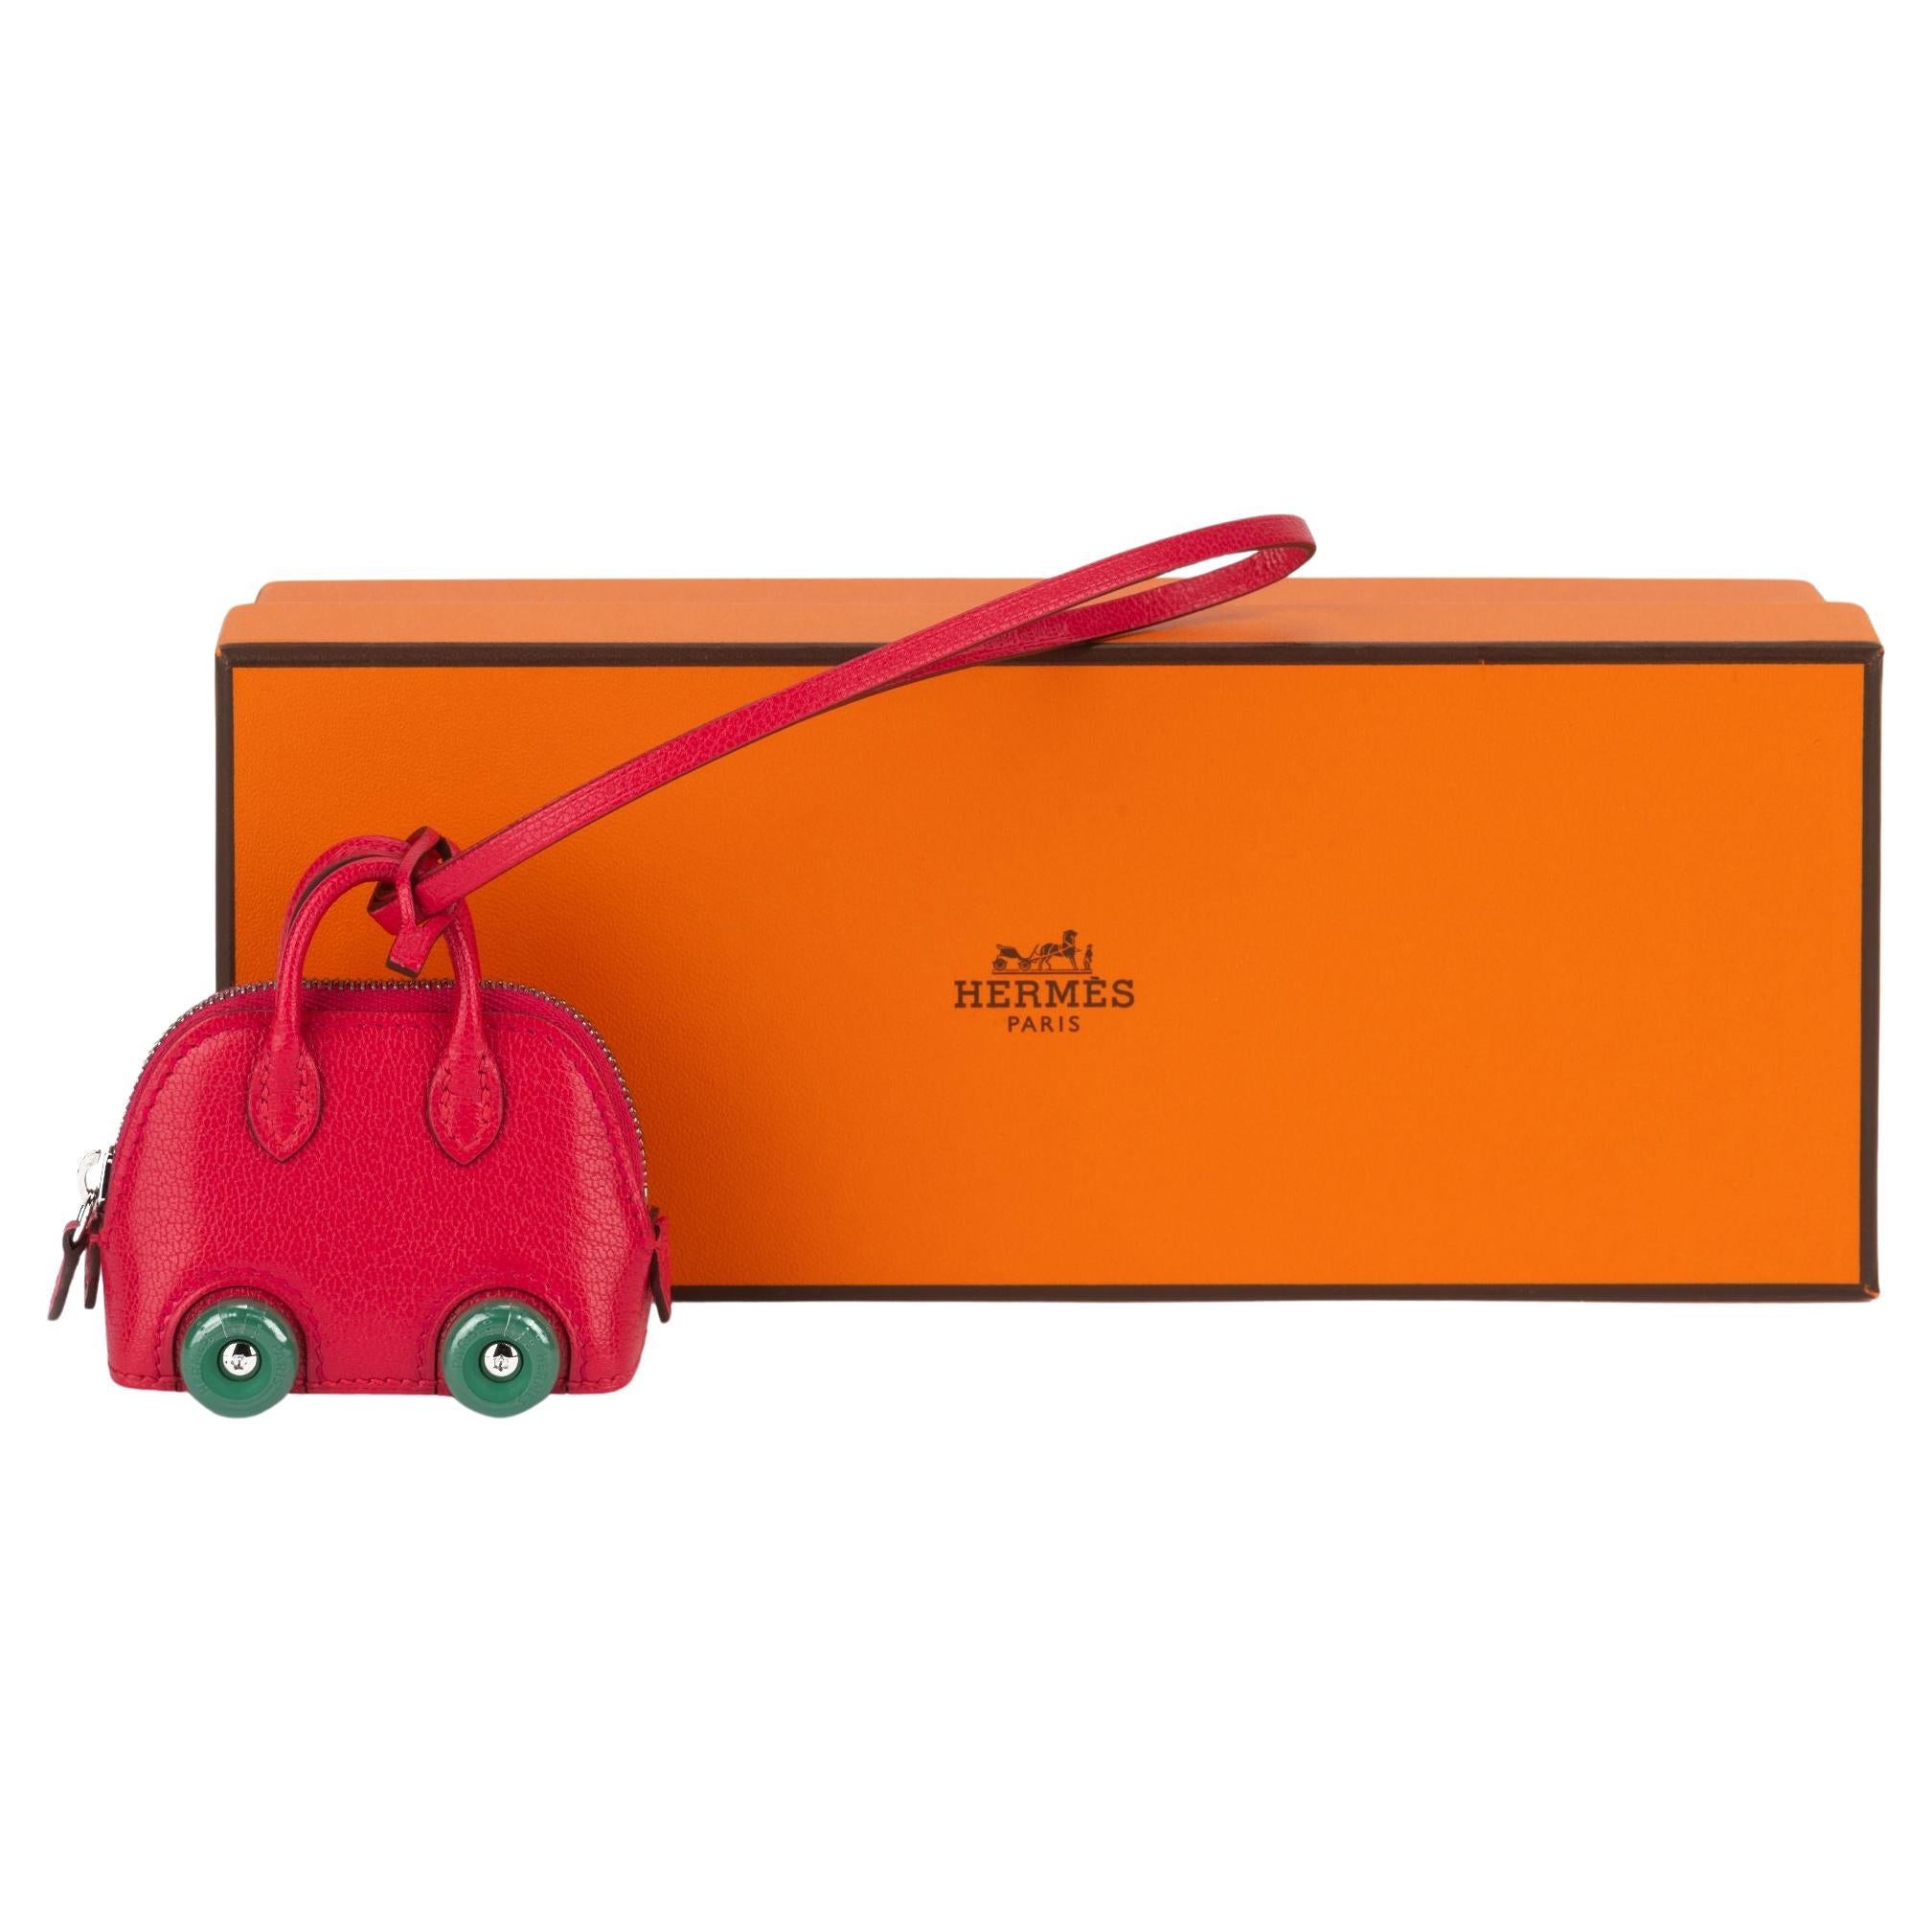 Hermès brand new super collectible bolide on wheels bag charm. Chevre mysore pink leather and green wheels. Never used, plastic on them . Functioning zipper allows to use the charm as a small pouch. Date stamp B for 2023. Comes with booklet and